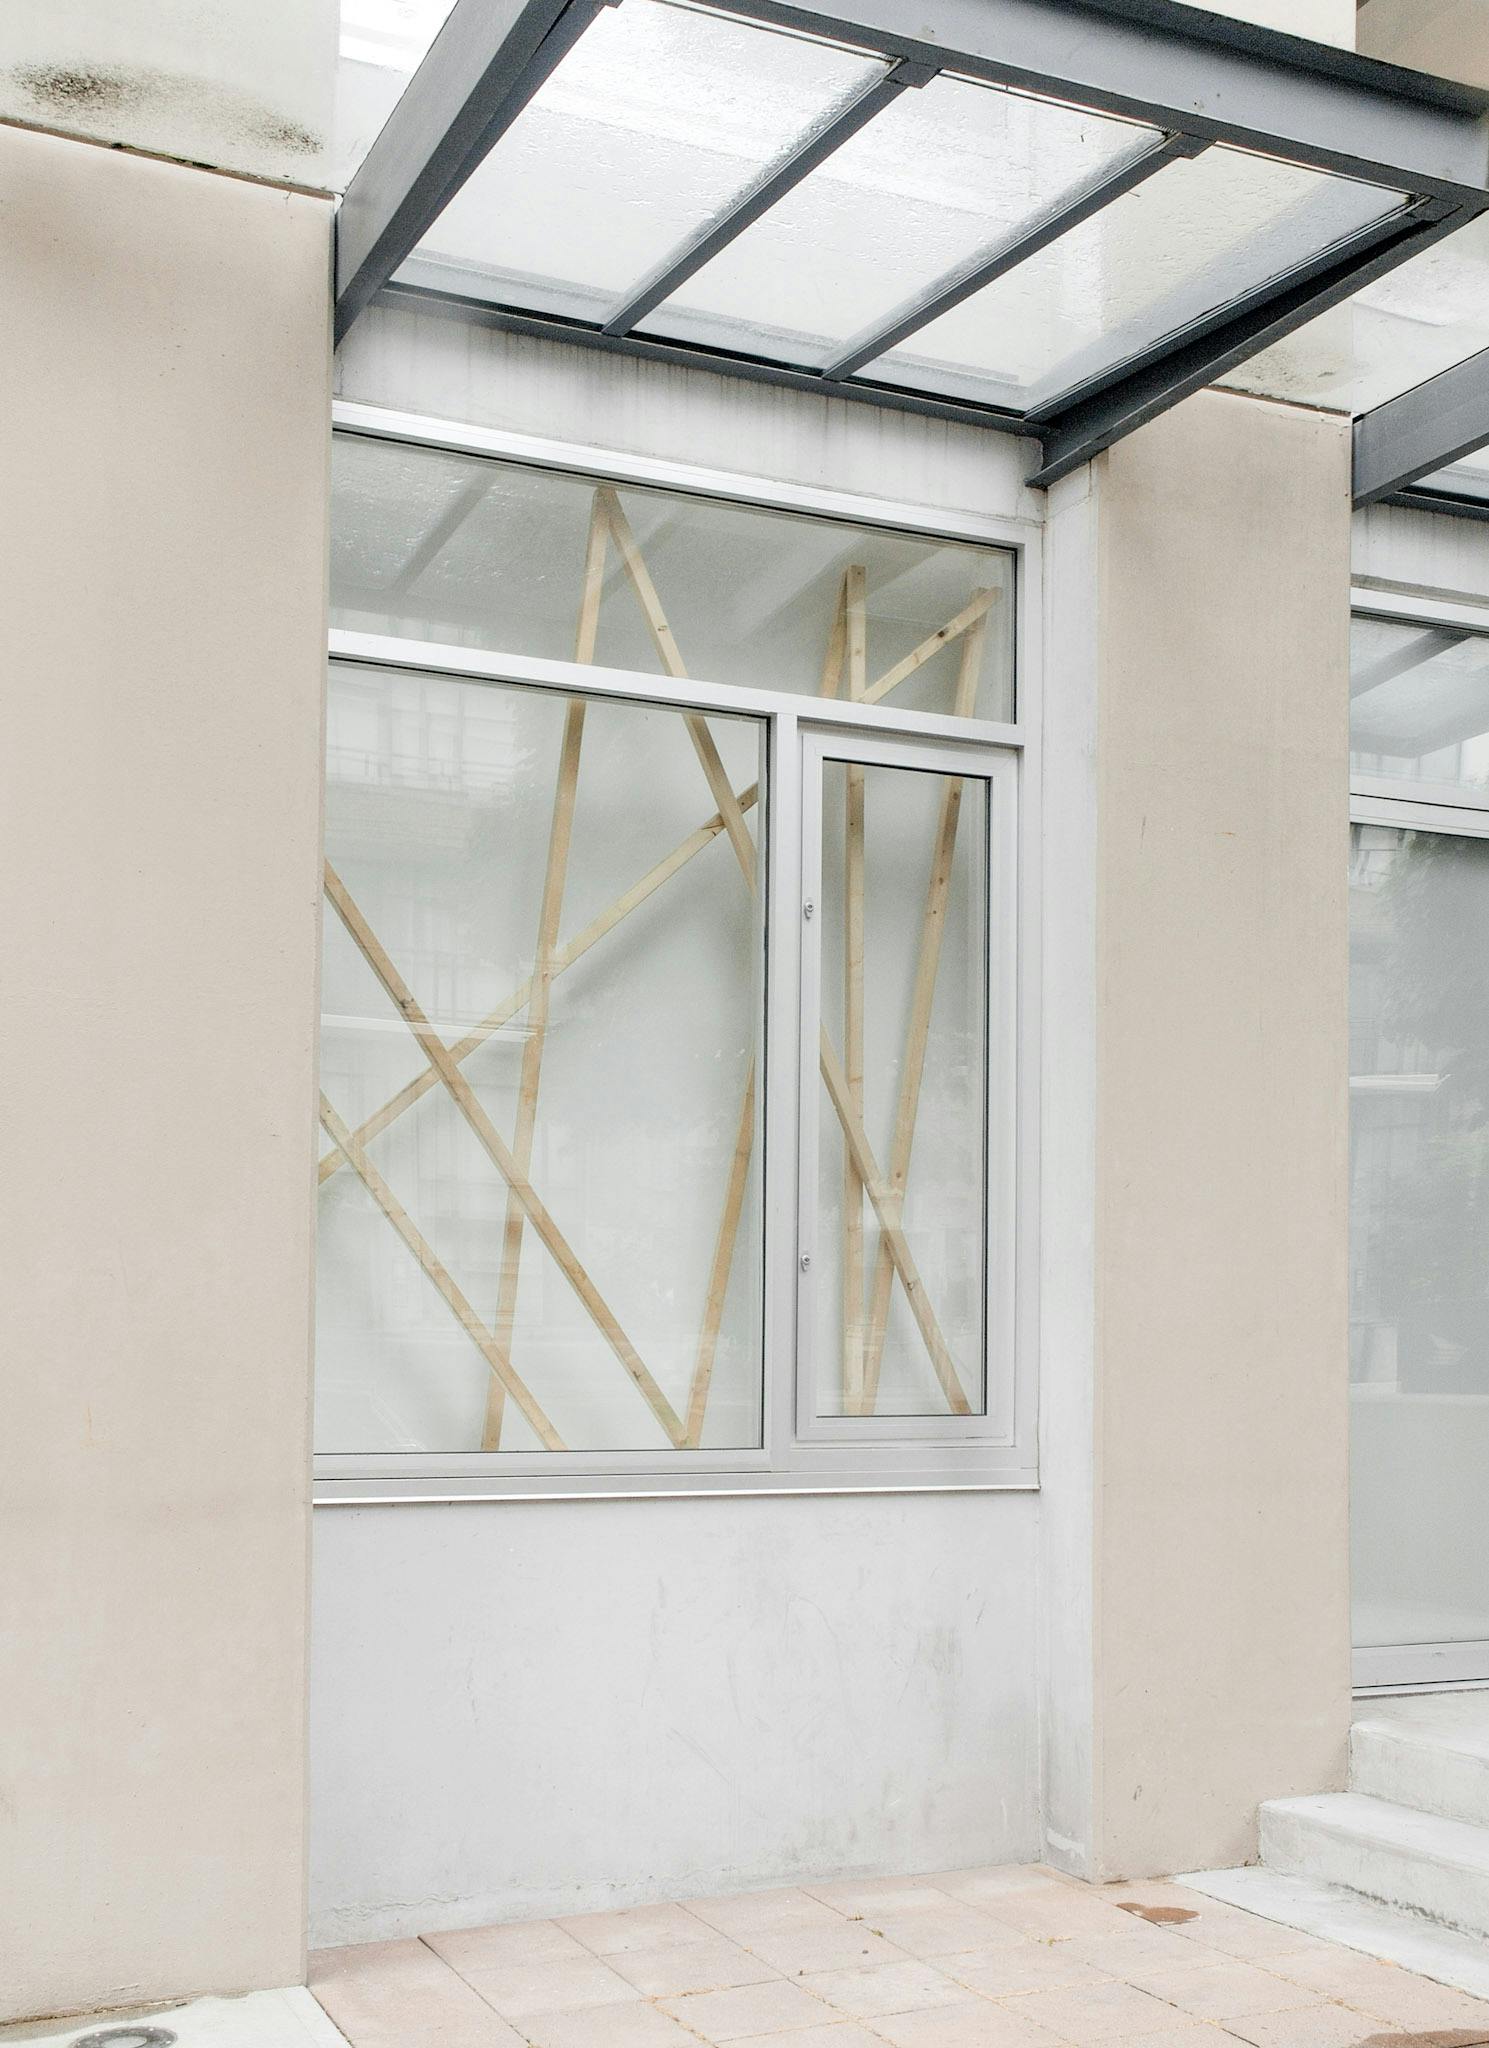 This image shows one of CAG’s window spaces, in which Elspeth Pratt’s installation art is displayed. Eight thin wooden bars are inserted in the window space diagonally to create a rough fence.  